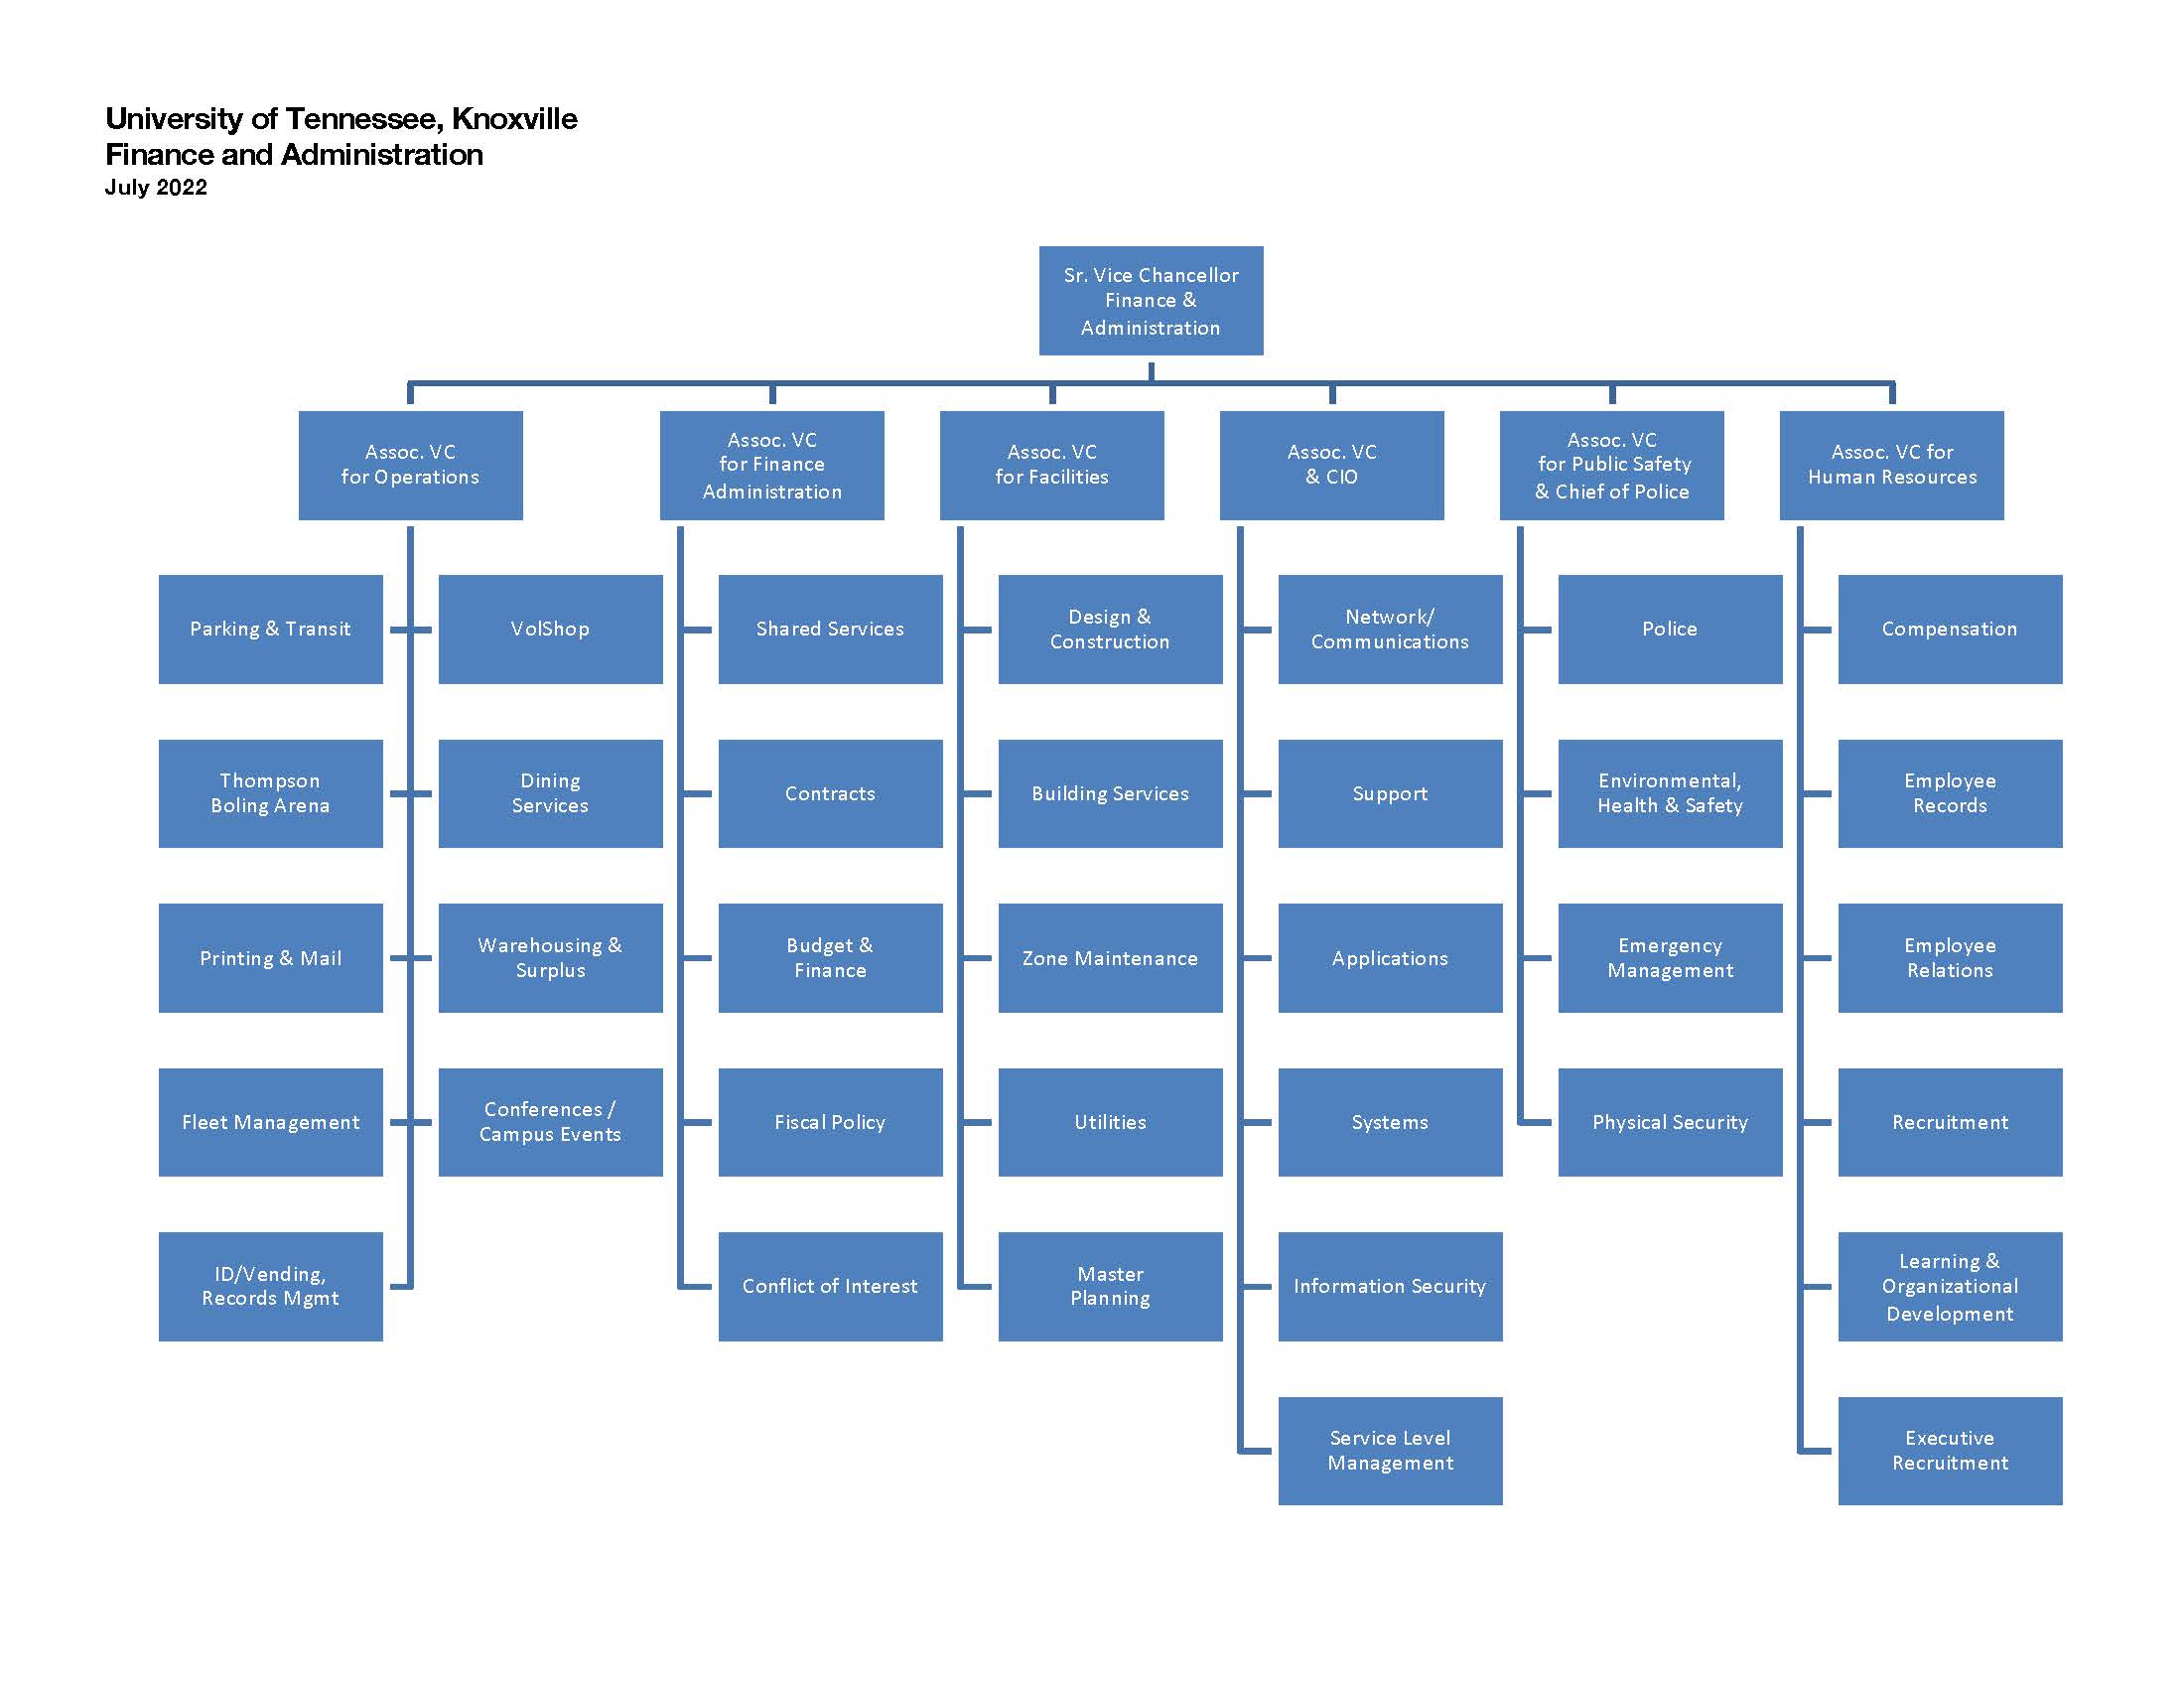 Image of Vice Chancellor of Finance and Administration organizational chart